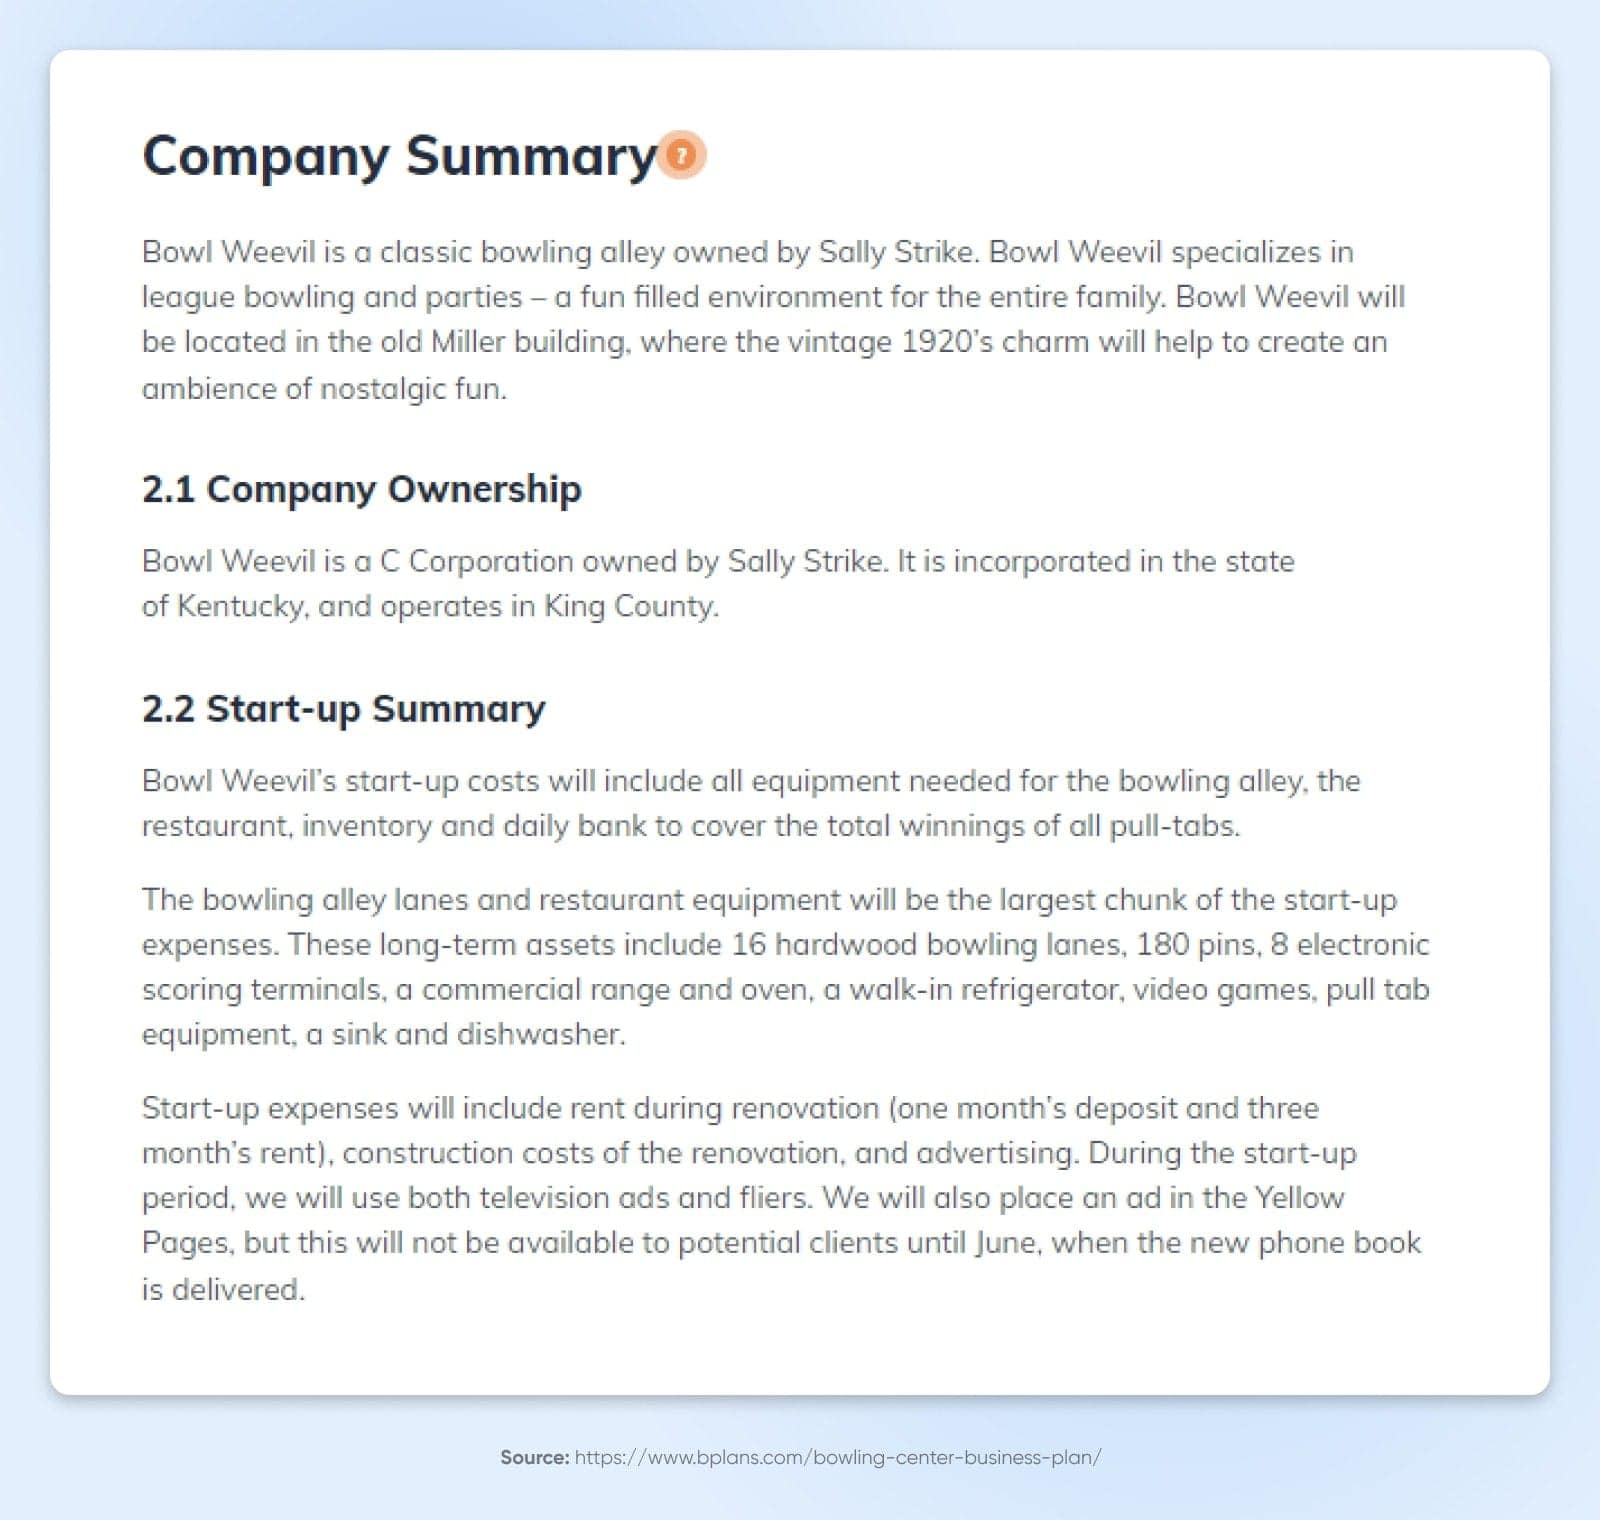 A Company Summary white page with sections on company ownership and start-up summary.